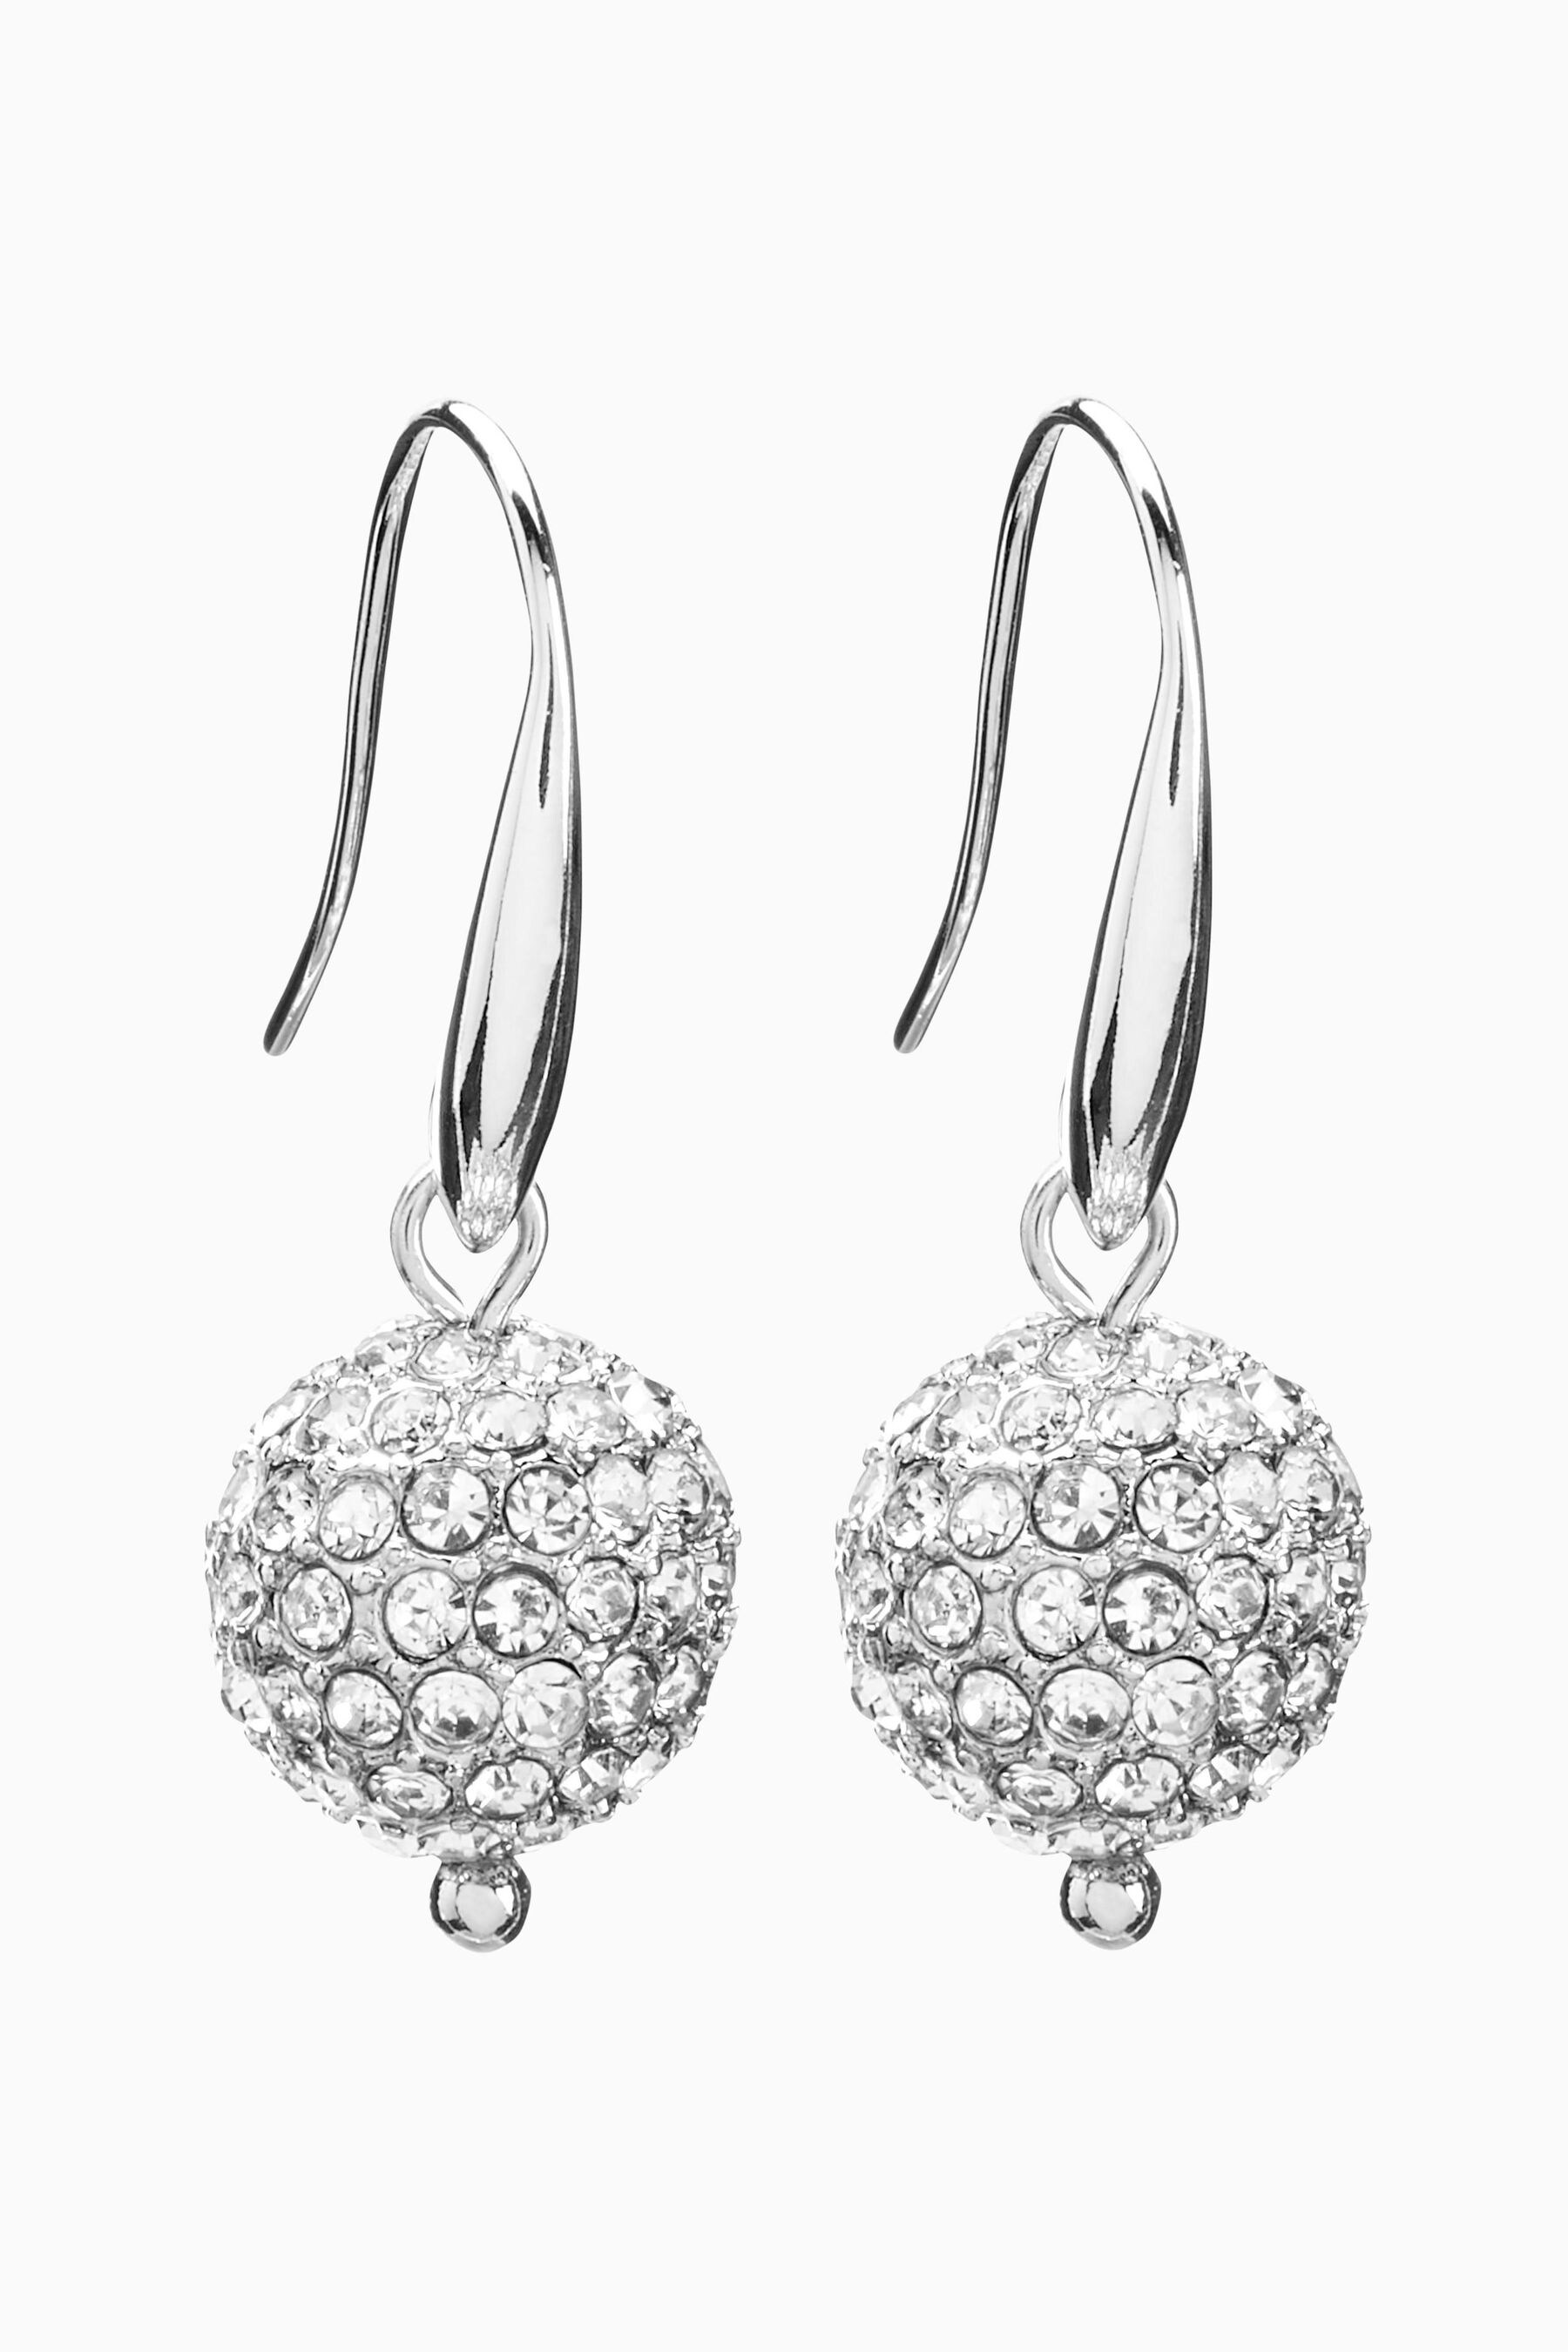 Next Pave Ball Drop Earrings €13